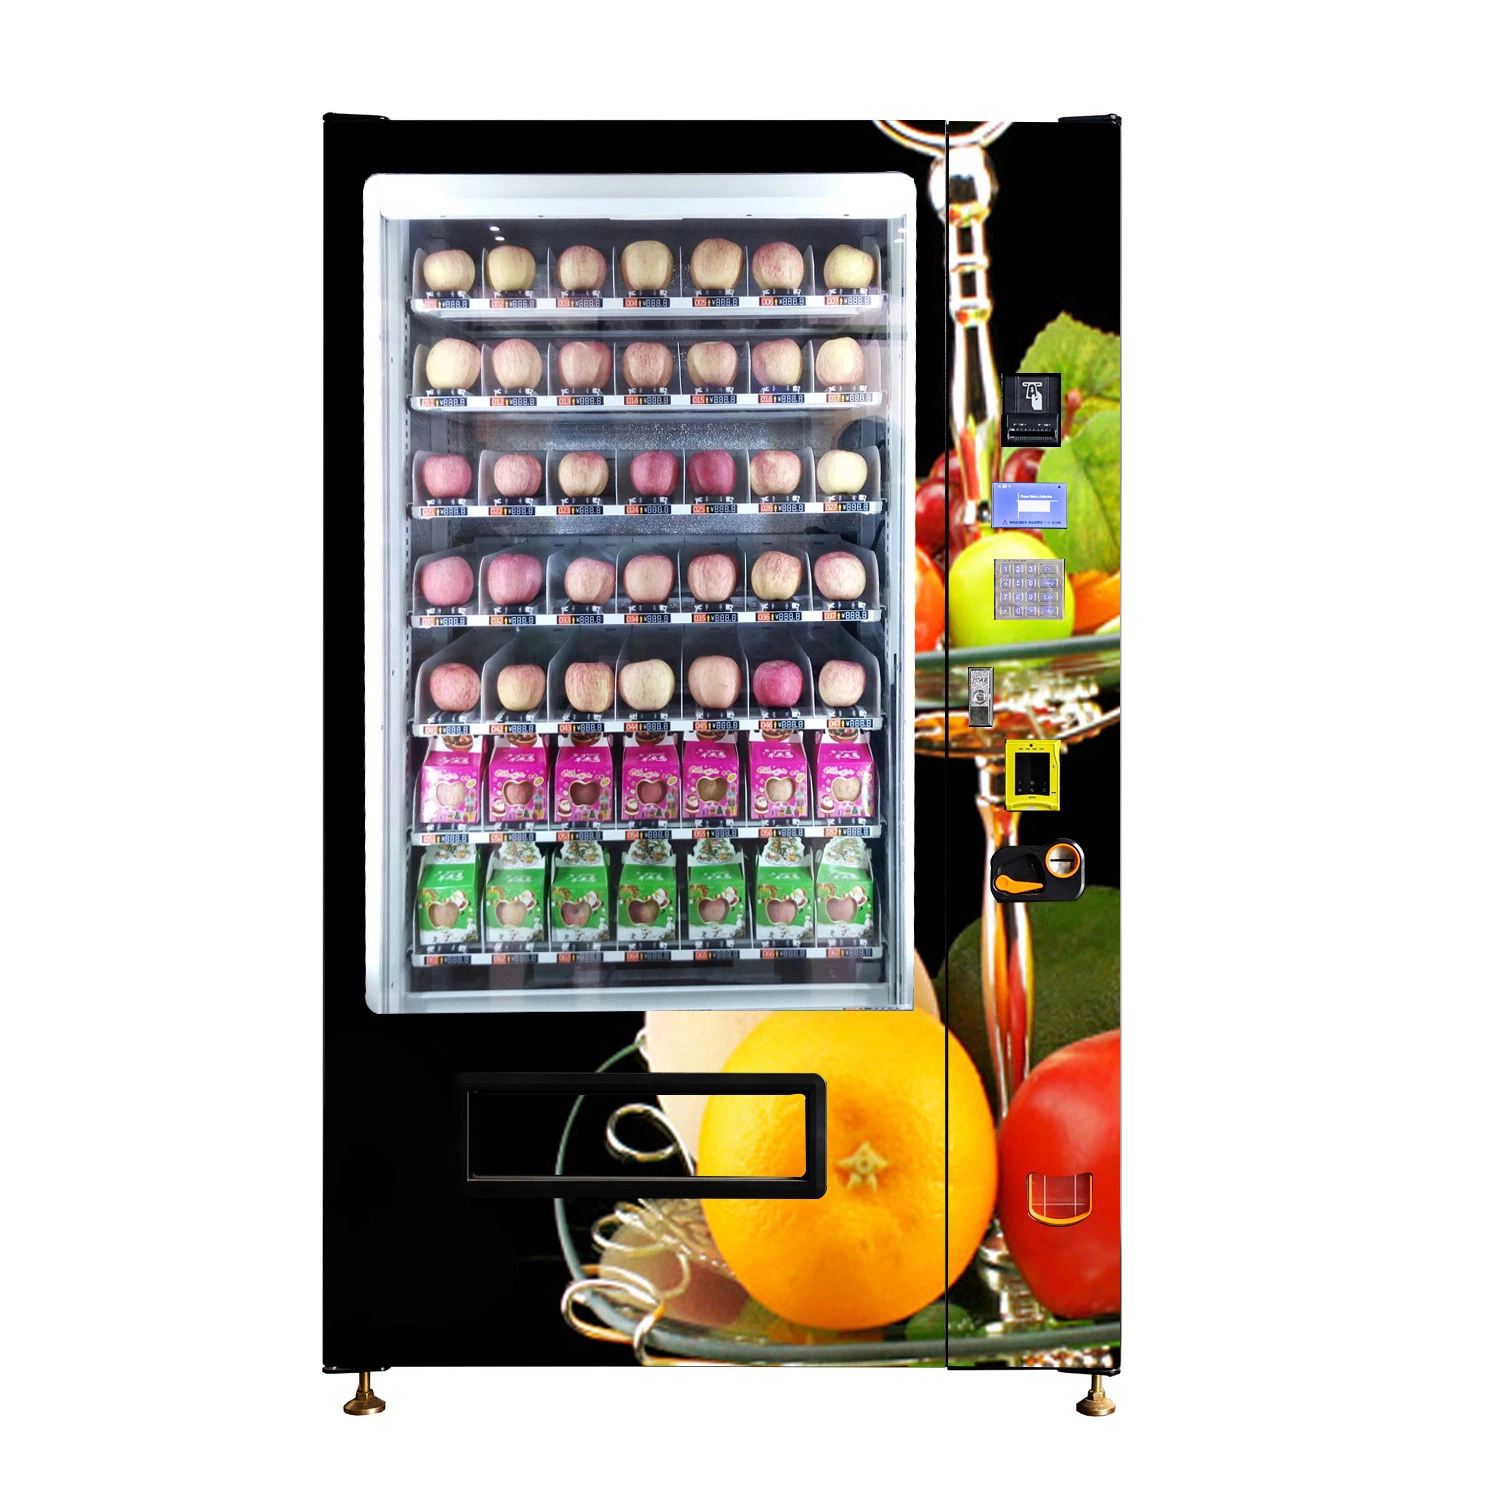 Vending Machine for Cakes, Bread and Beverage Foods with Refrigeration